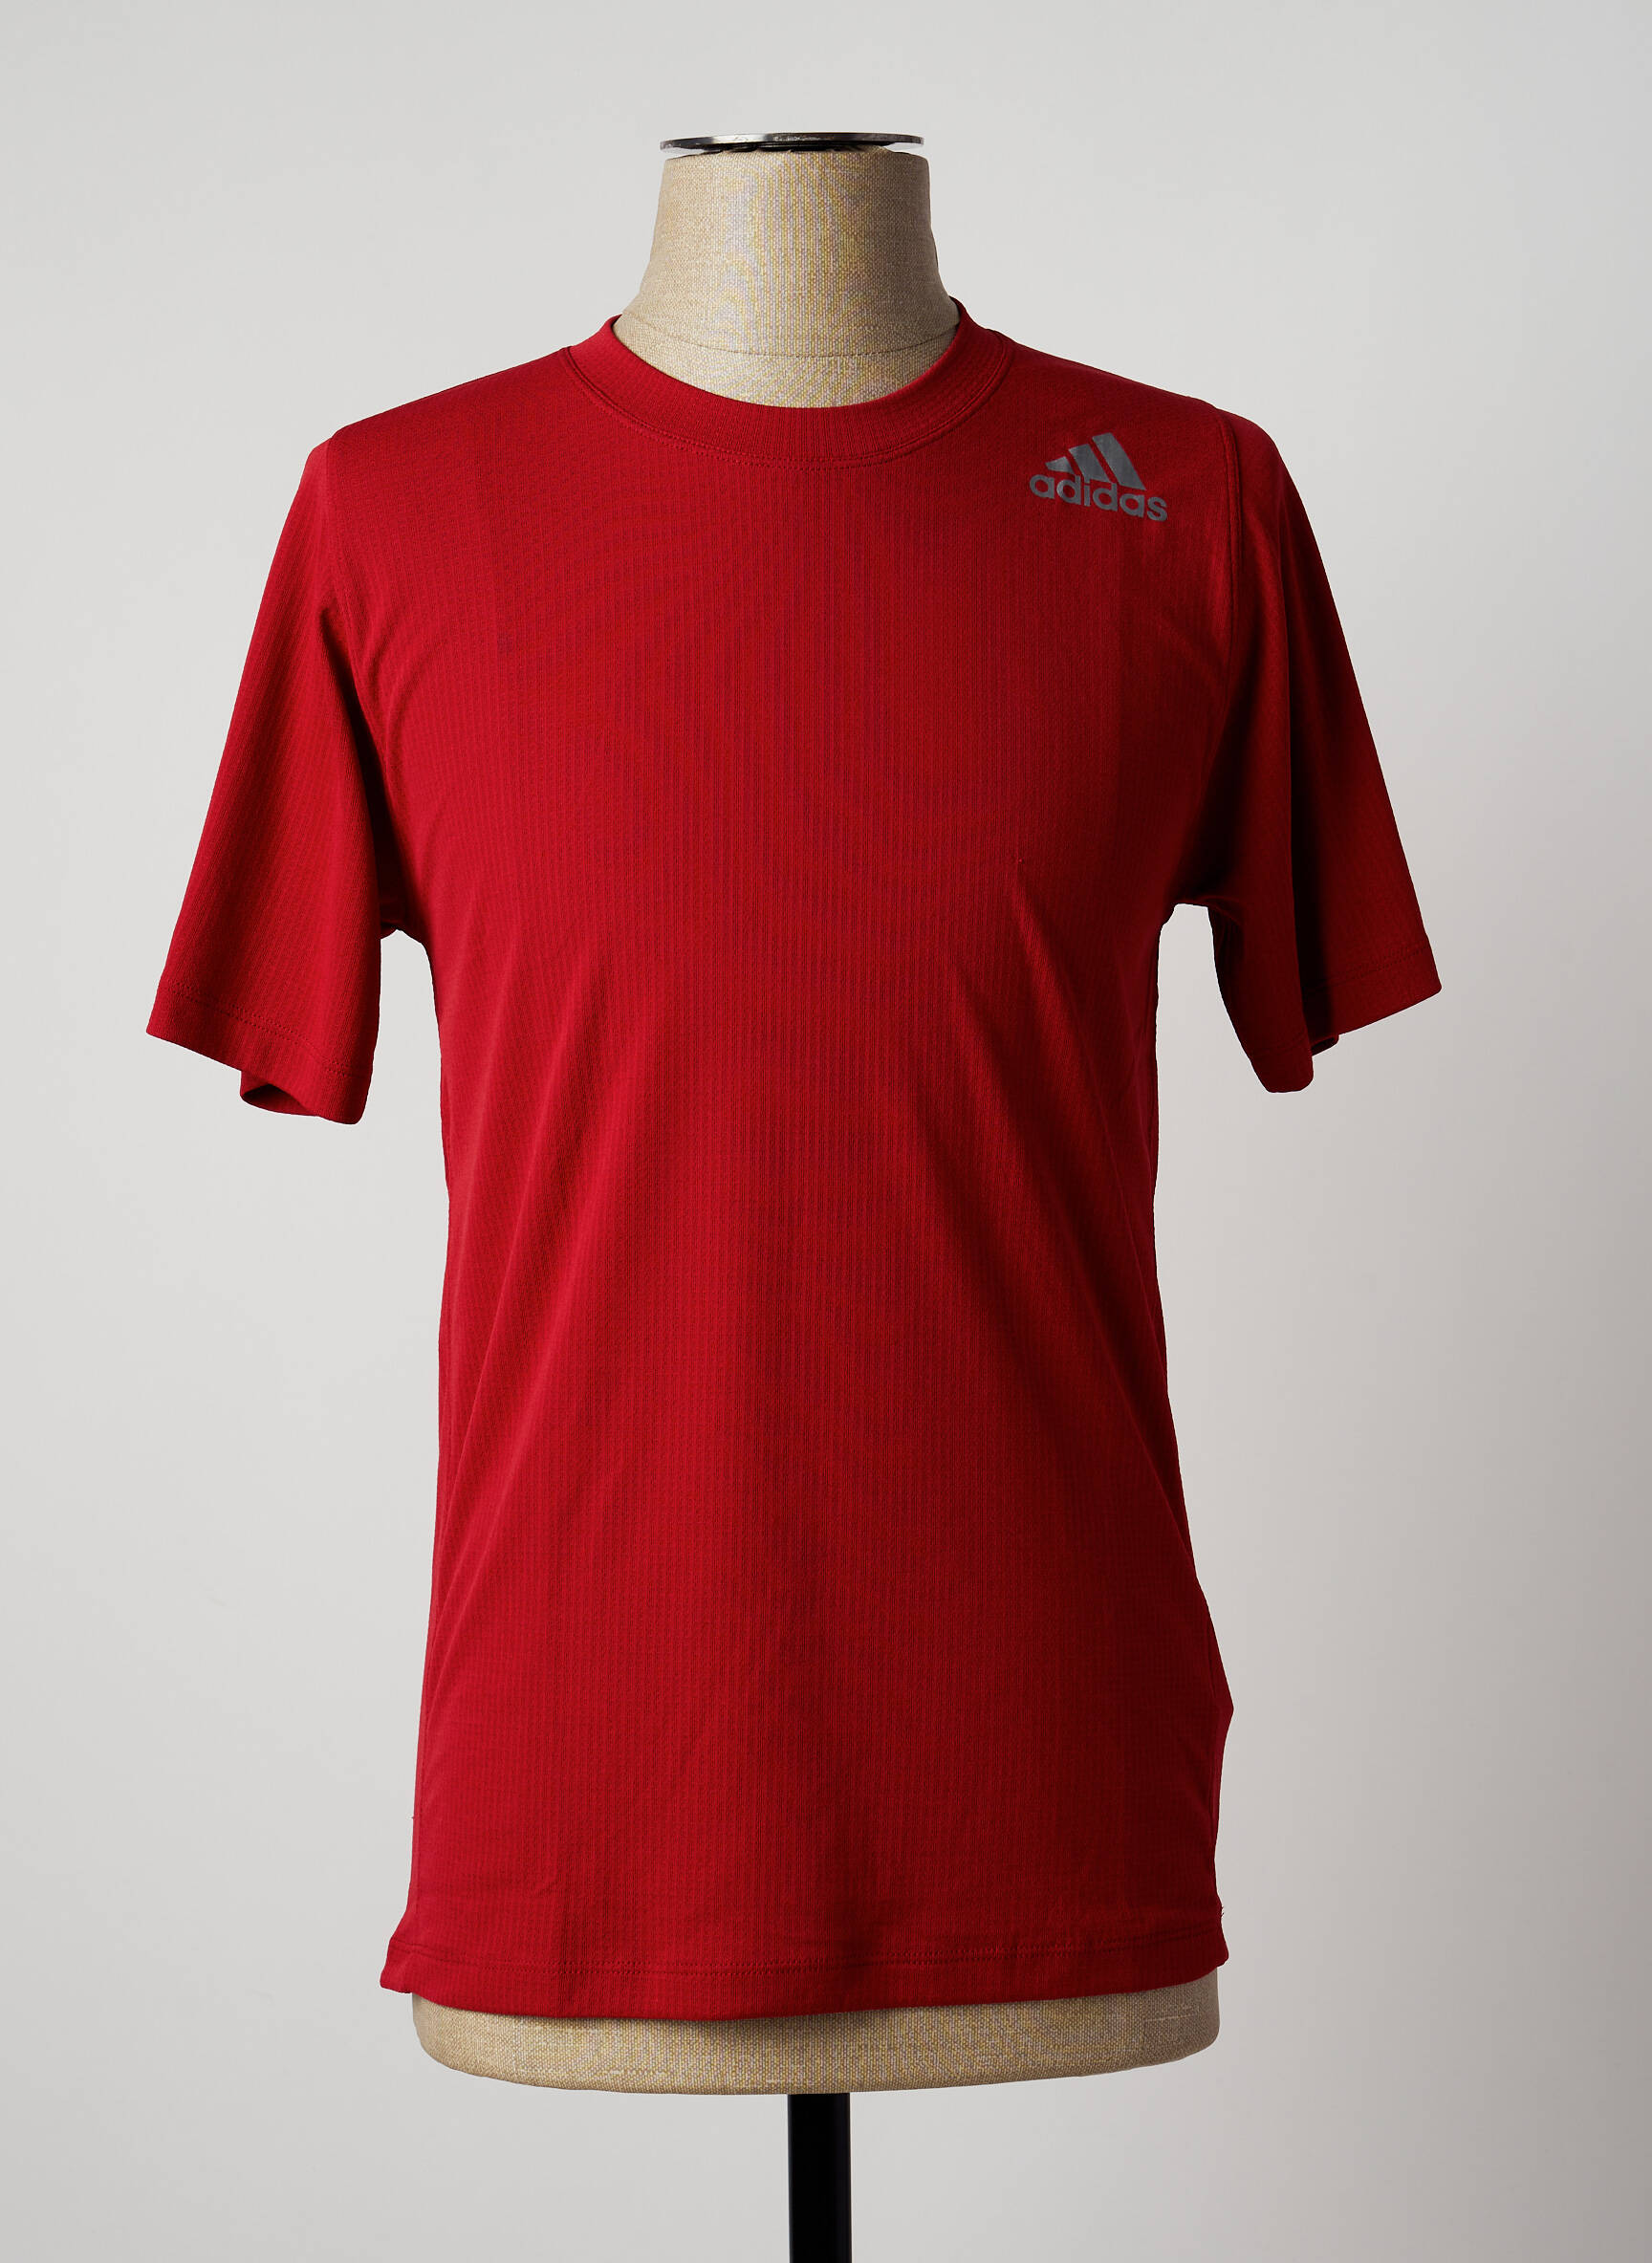 https://media.modz.fr/pictures/2022/08-aout/2652308/zoom2/tshirts-homme-rouge-adidas-2652308_565.jpg